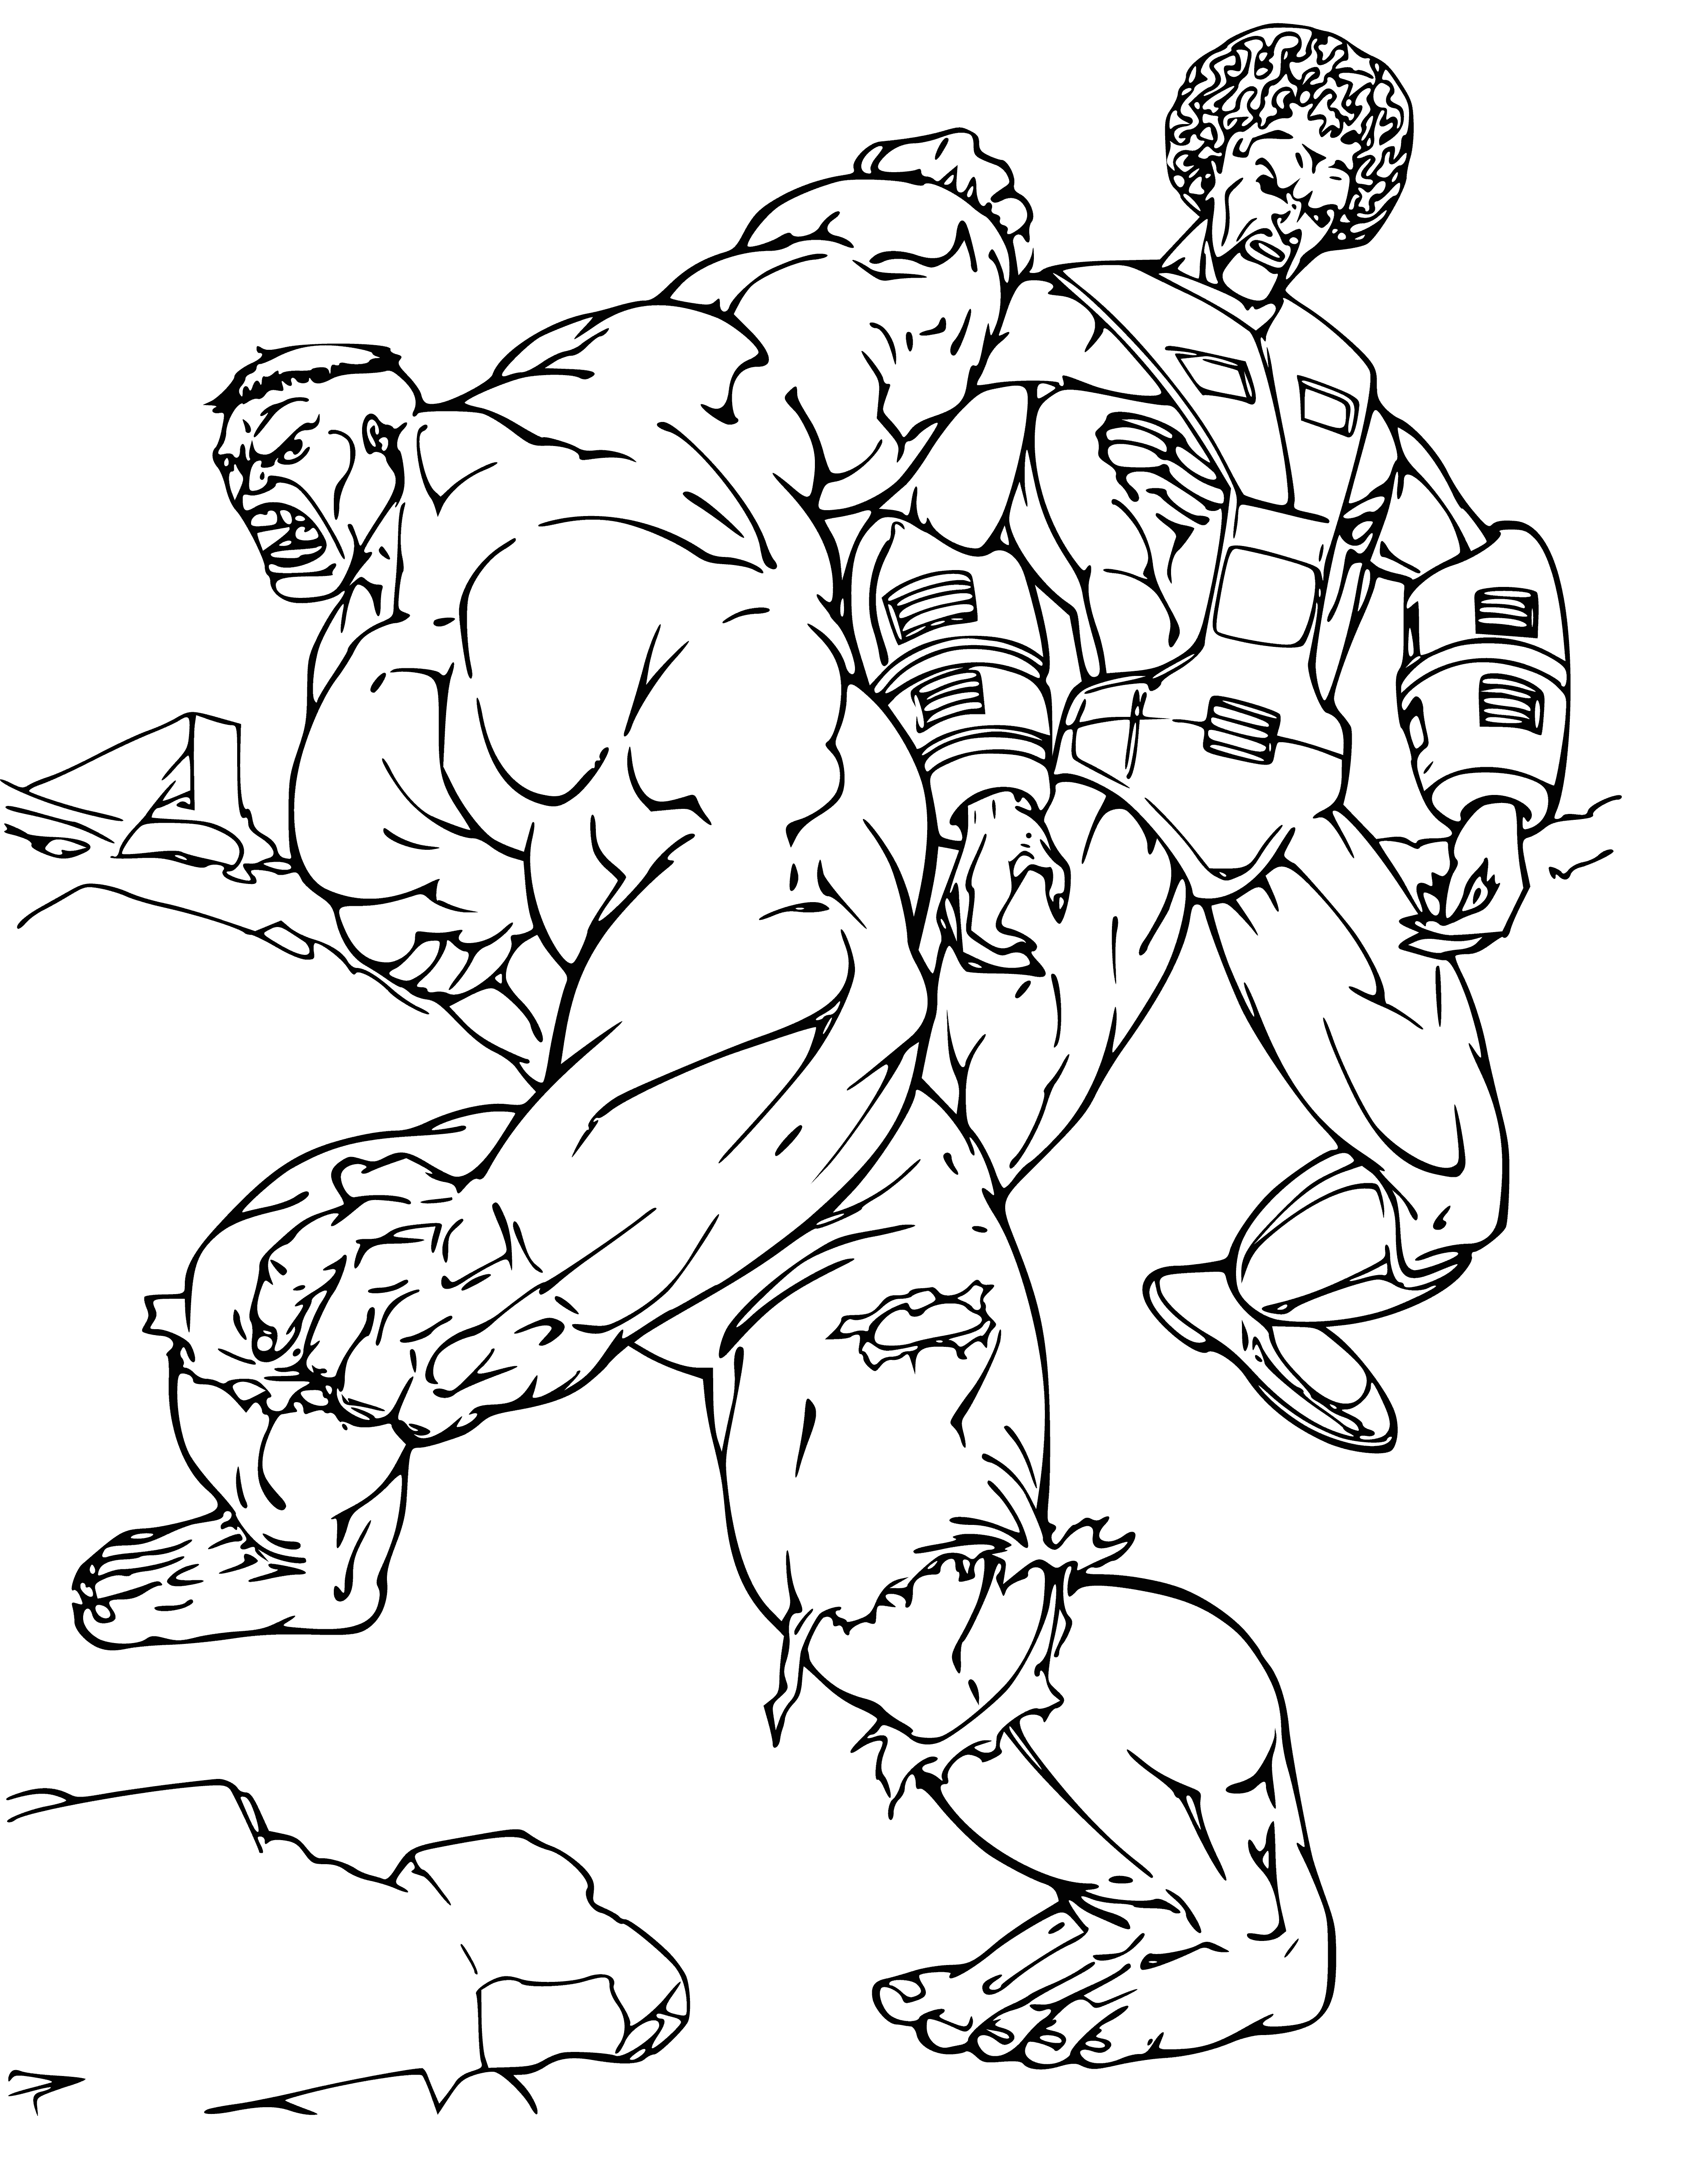 coloring page: The Hulk is a Marvel superhero with immense strength who battles General Ross, a villainous nemesis with super strength and cunning.